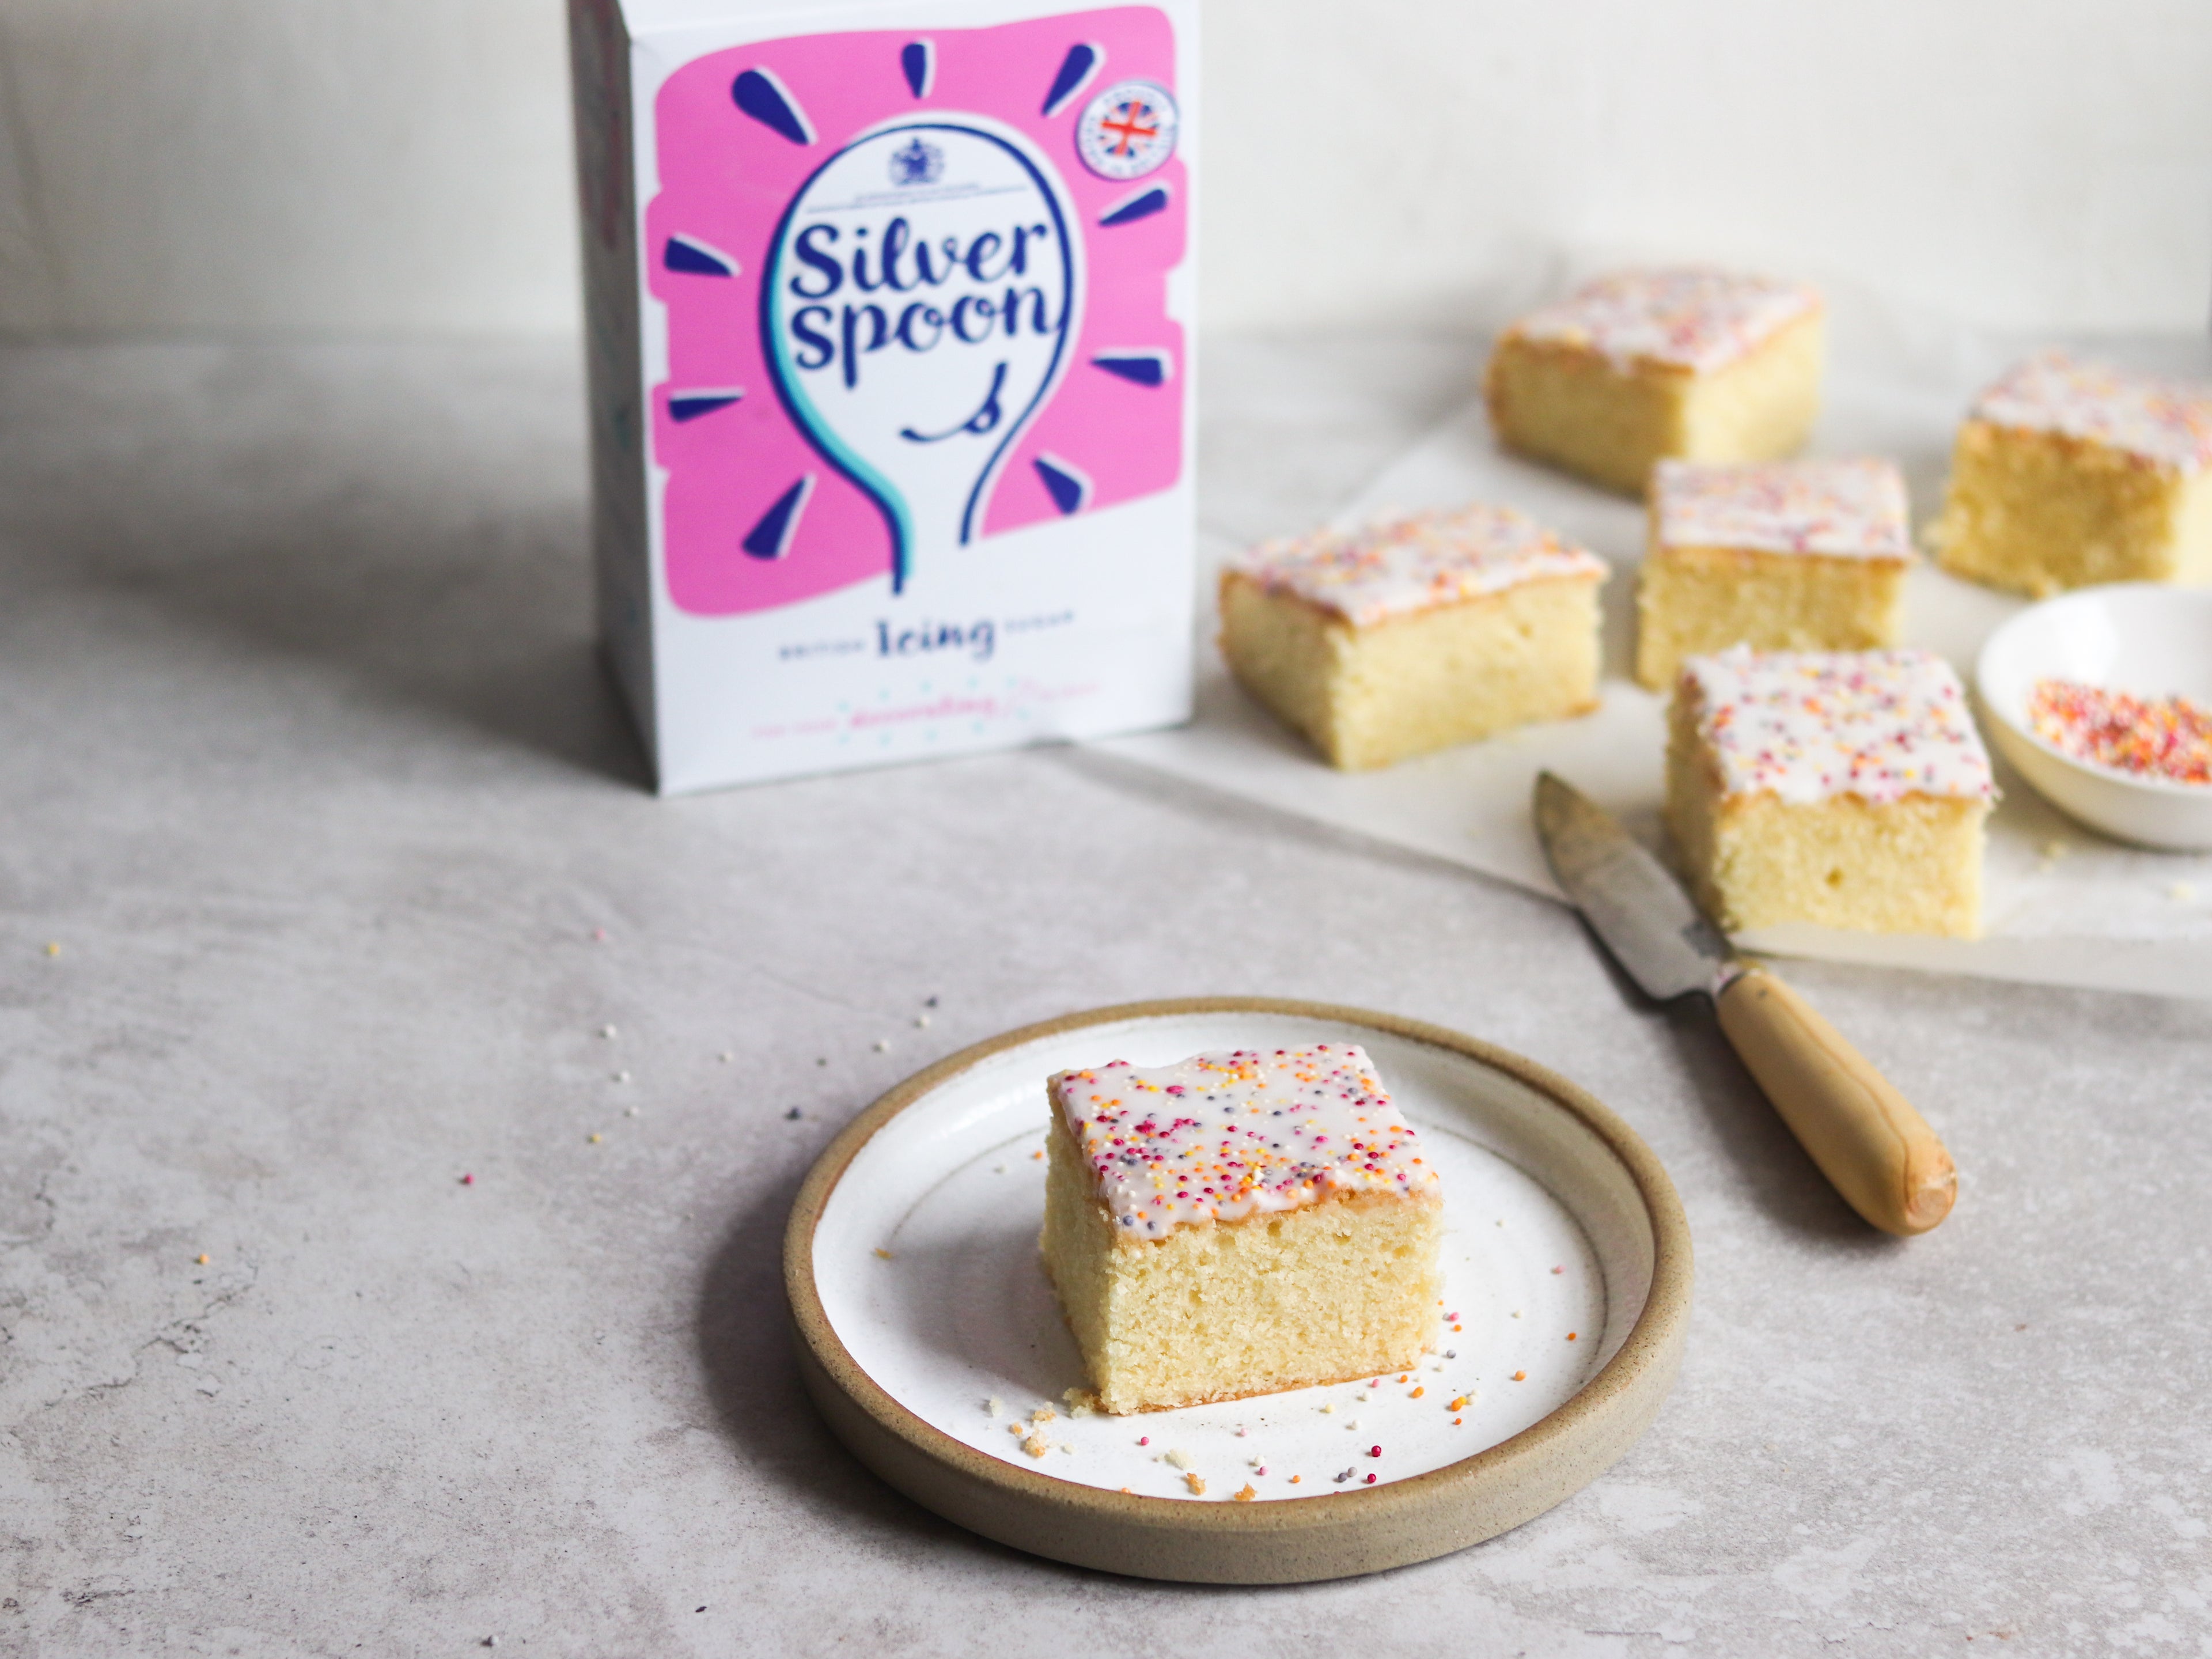 A Sprinkle Cake slice on a plate, with a box of Silver Spoon Icing Sugar in the background